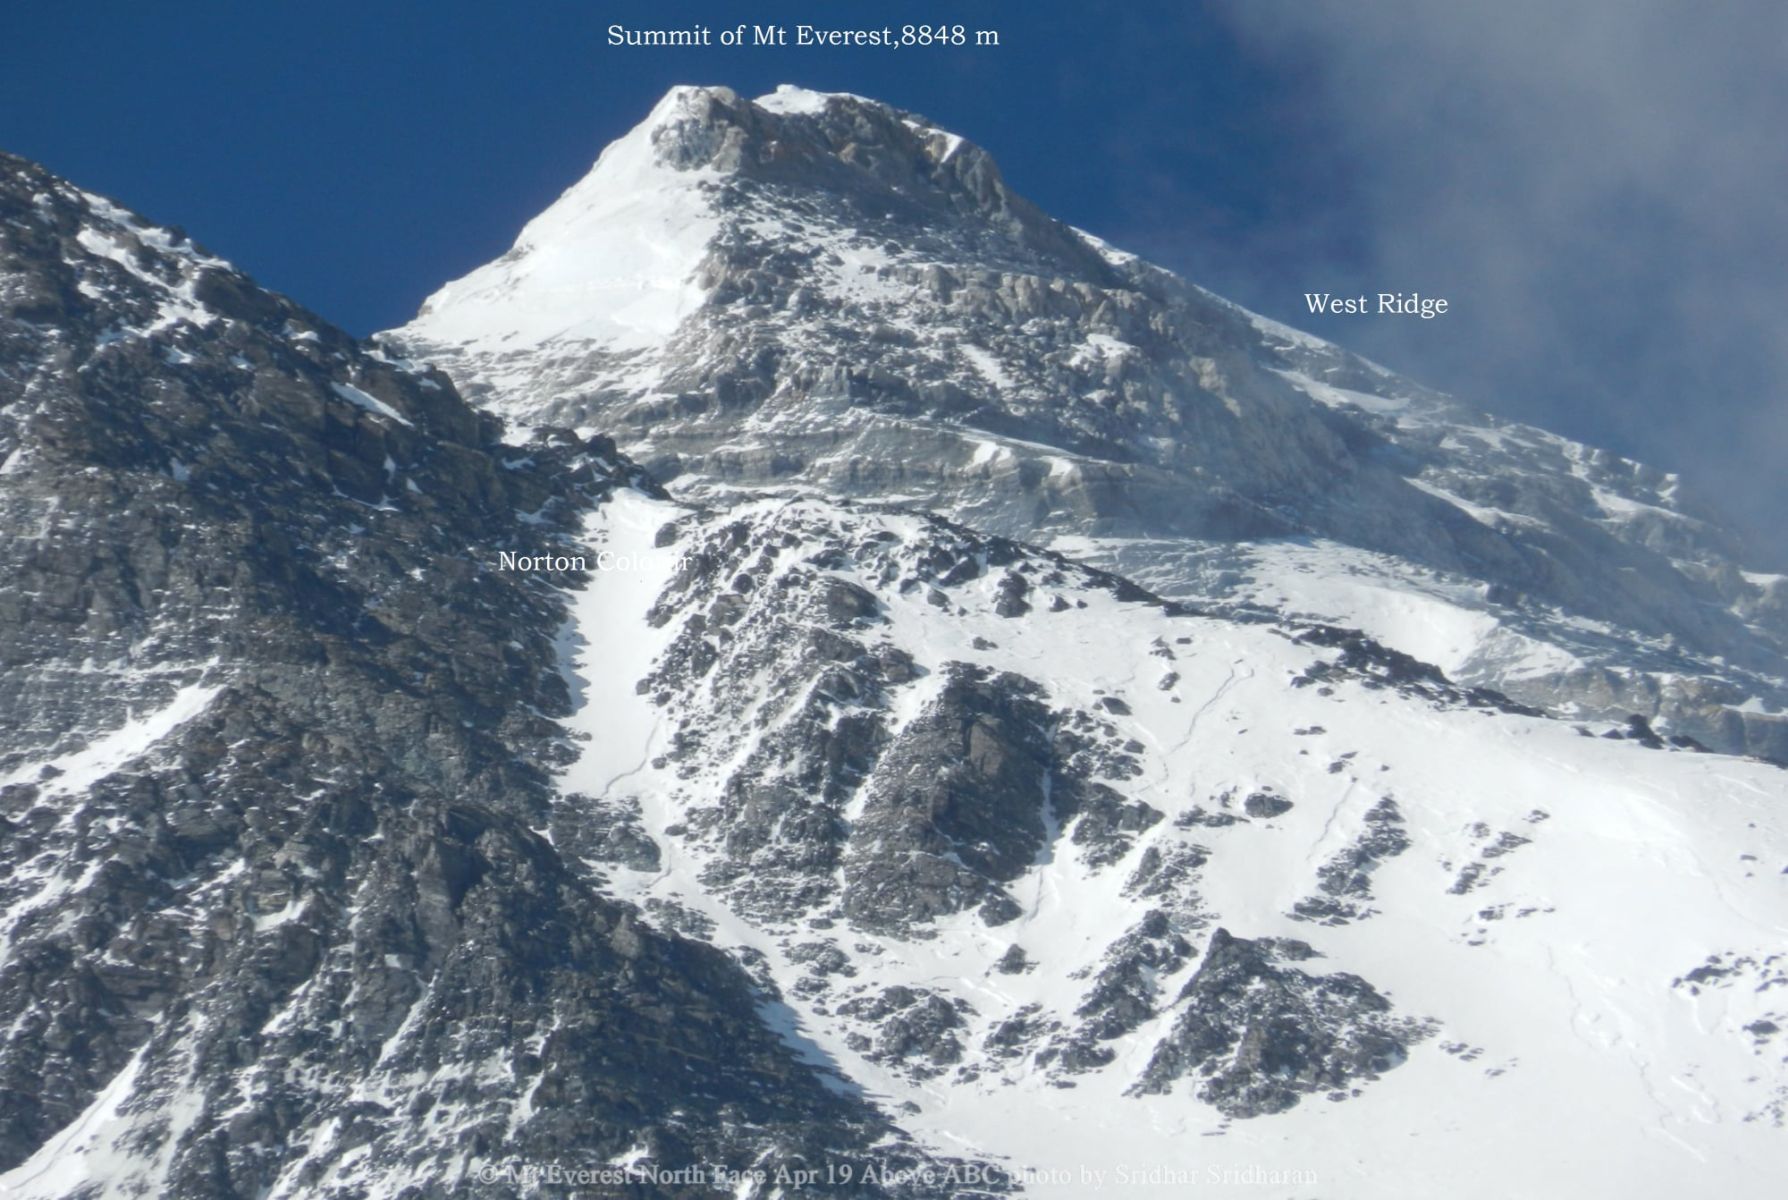 Everest North Side ascent route